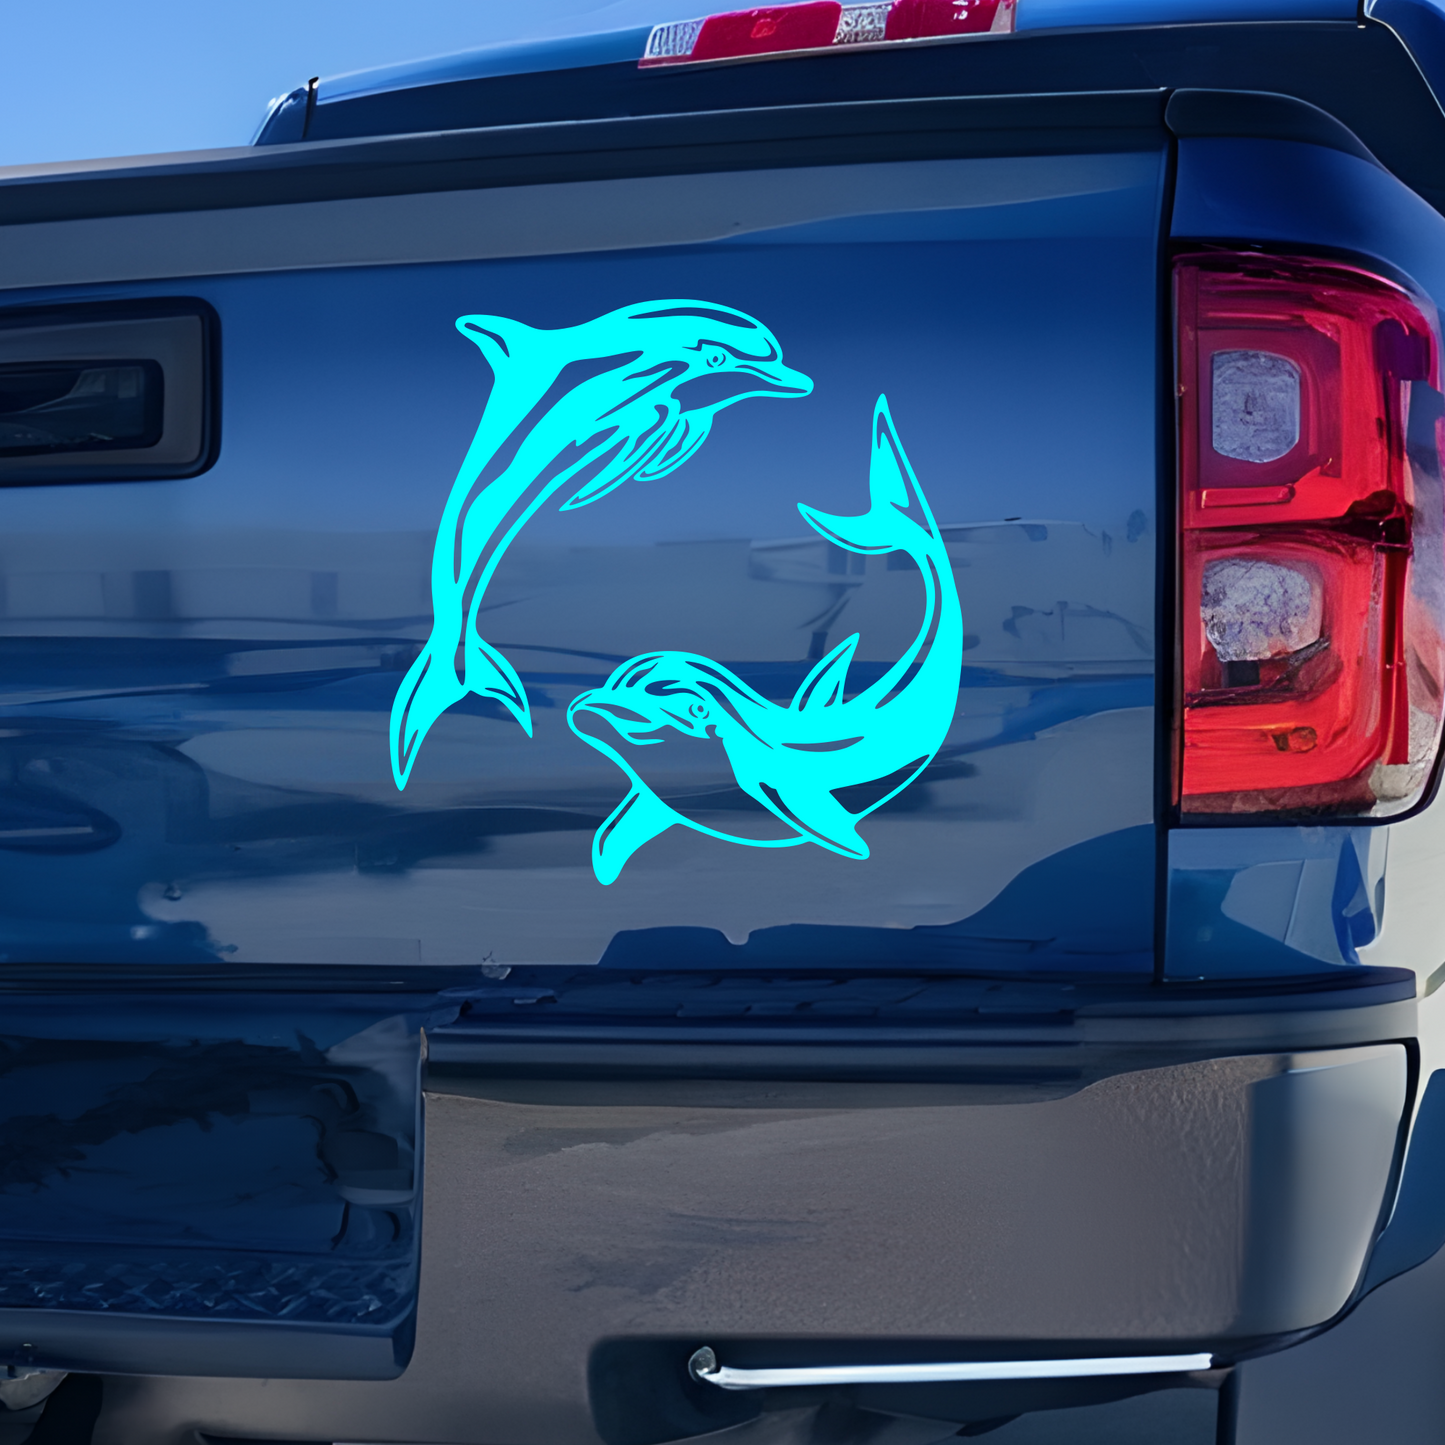 Pair of Dolphins Vinyl Decal | Circle of Dolphins Vinyl Sticker